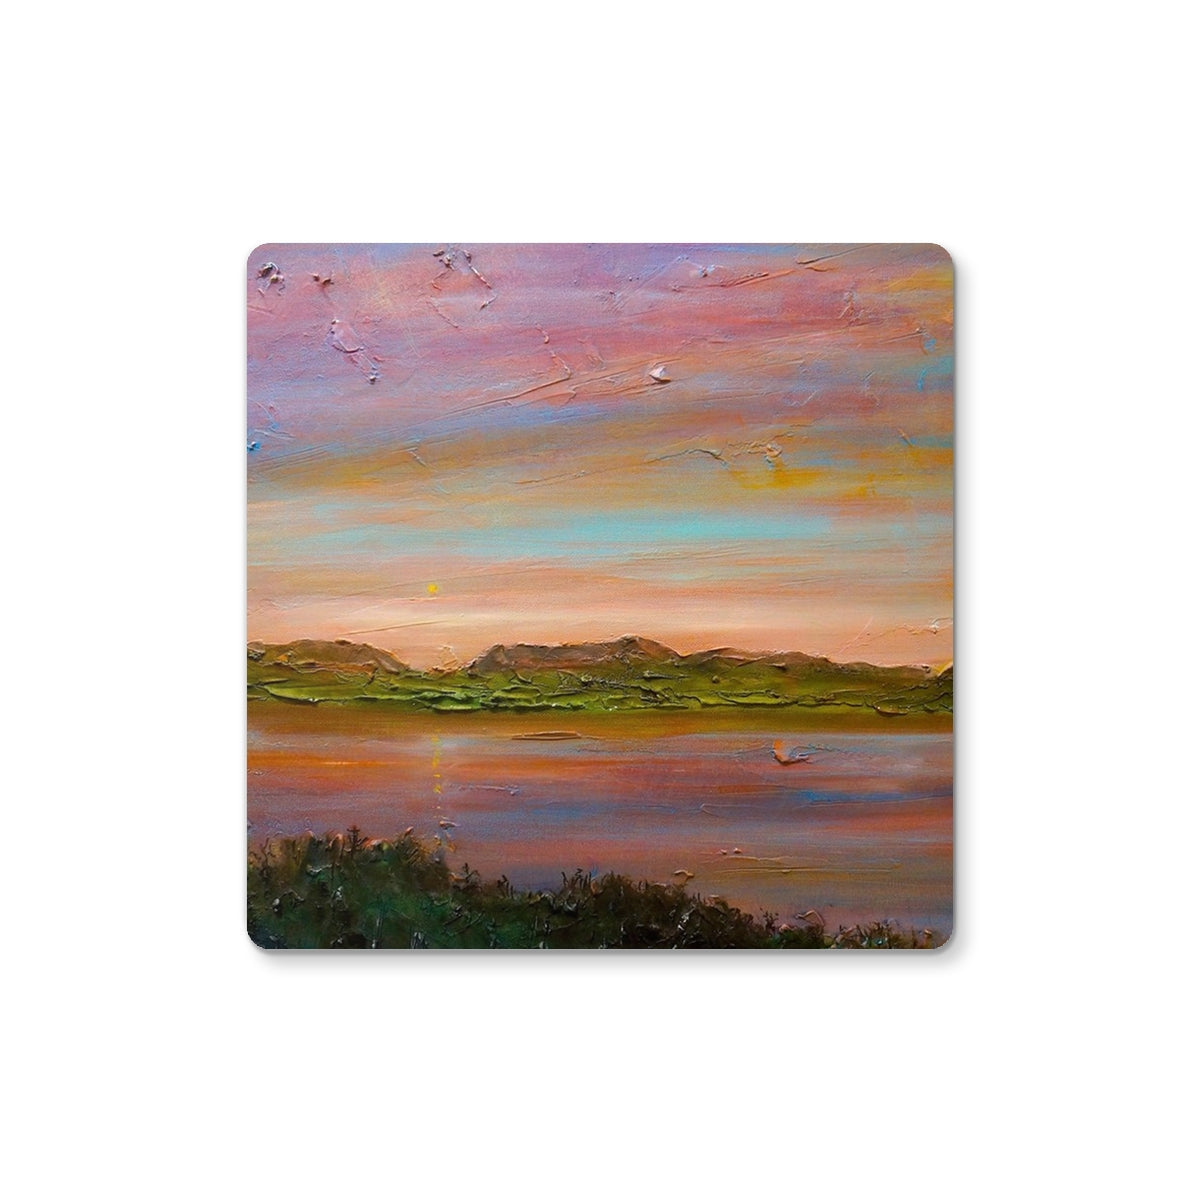 Gourock Golf Club Sunset Art Gifts Coaster-Coasters-River Clyde Art Gallery-Single Coaster-Paintings, Prints, Homeware, Art Gifts From Scotland By Scottish Artist Kevin Hunter